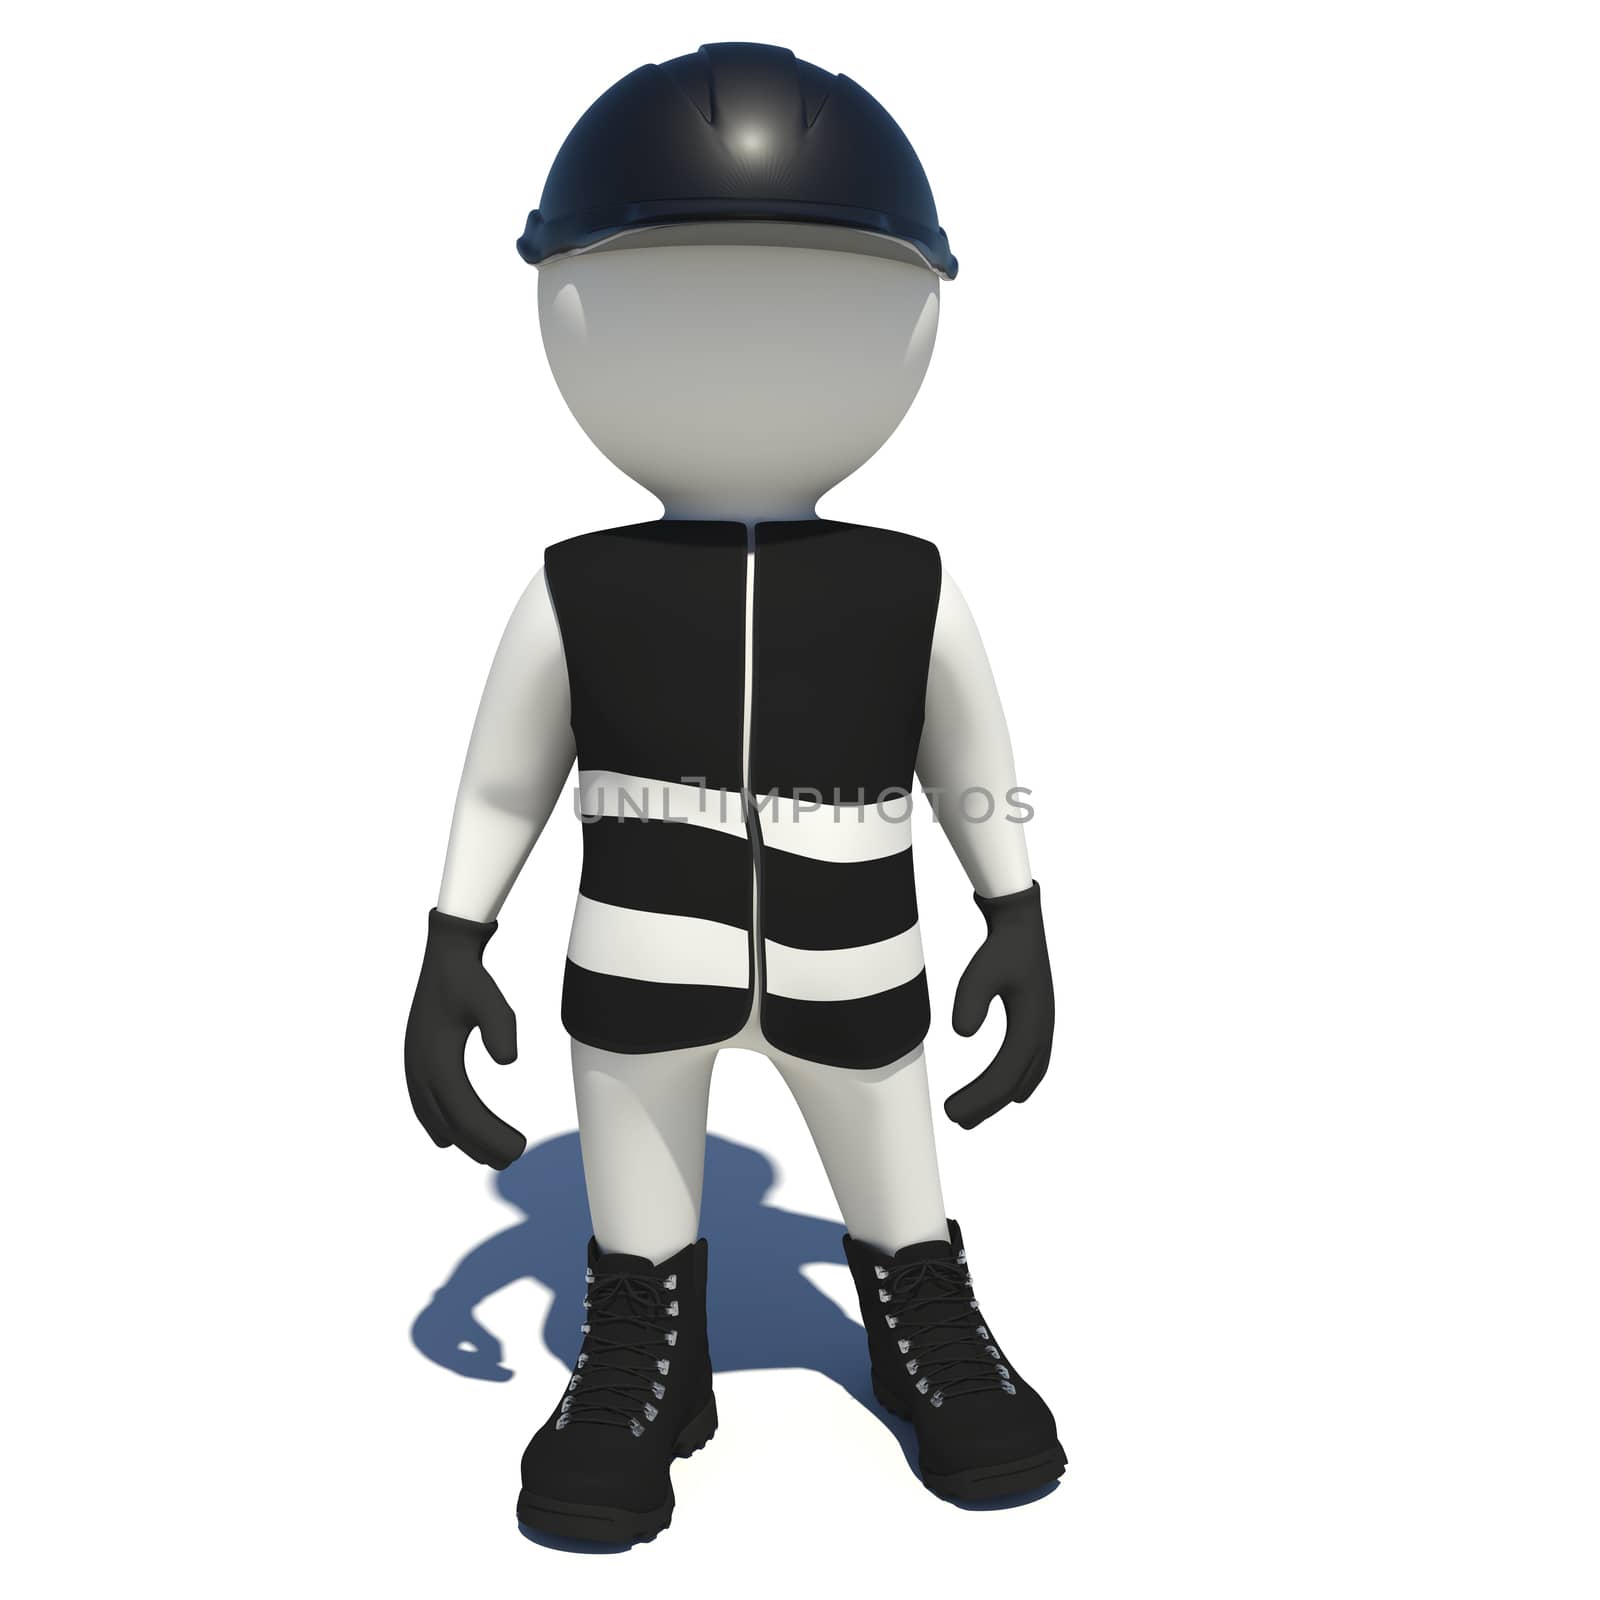 Worker in black vest, shoes and helmet. Isolated render on white background